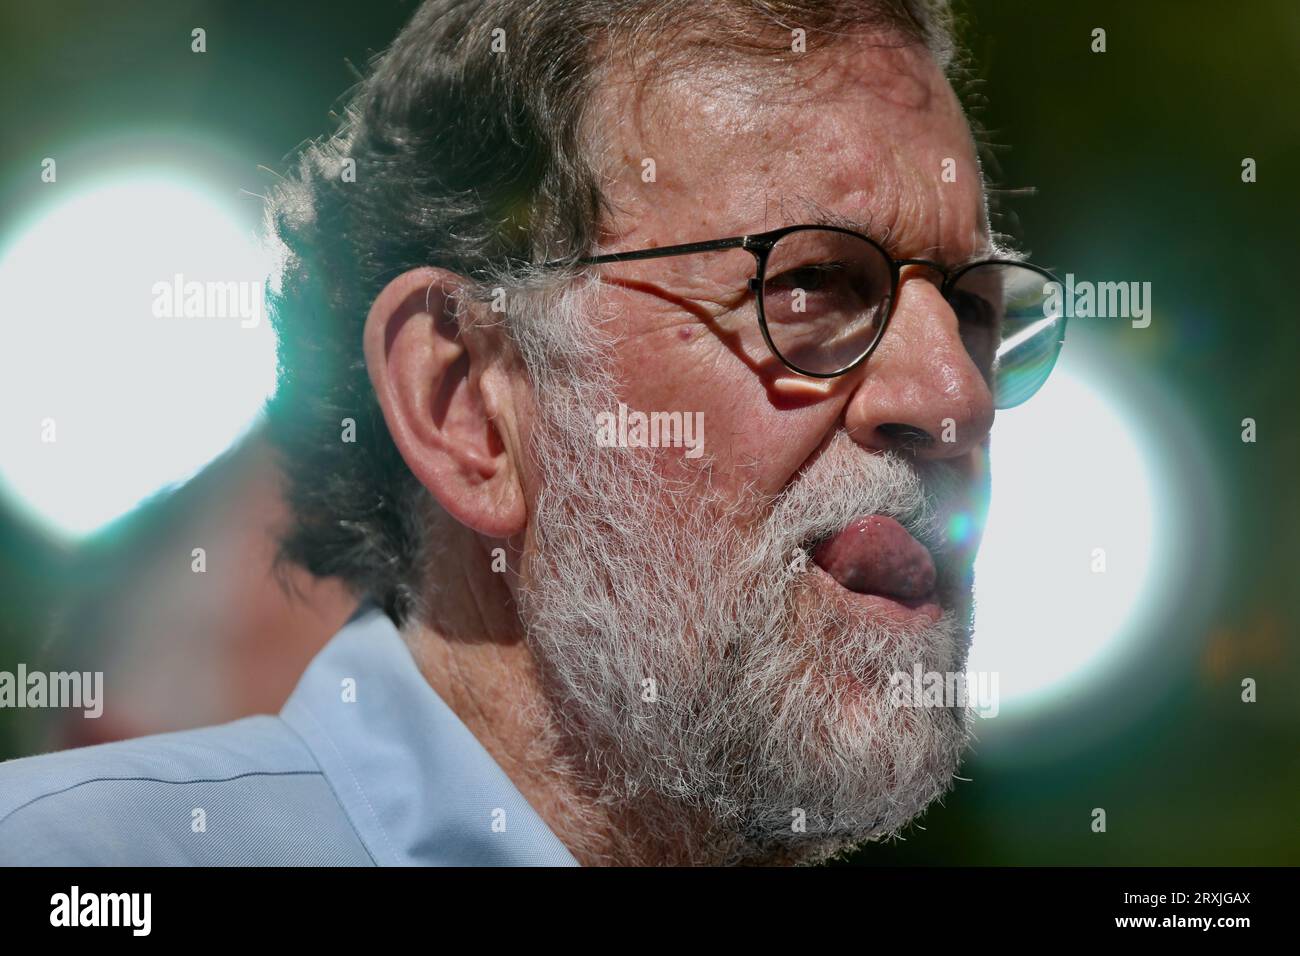 Madrid, Spain. 24th Sep, 2023. Former President Mariano Rajoy (2011-2018) of the Popular Party attends a rally against a possible amnesty law for accused Catalan independence supporters in Madrid. Credit: Cesar Luis de Luca/dpa/Alamy Live News Stock Photo